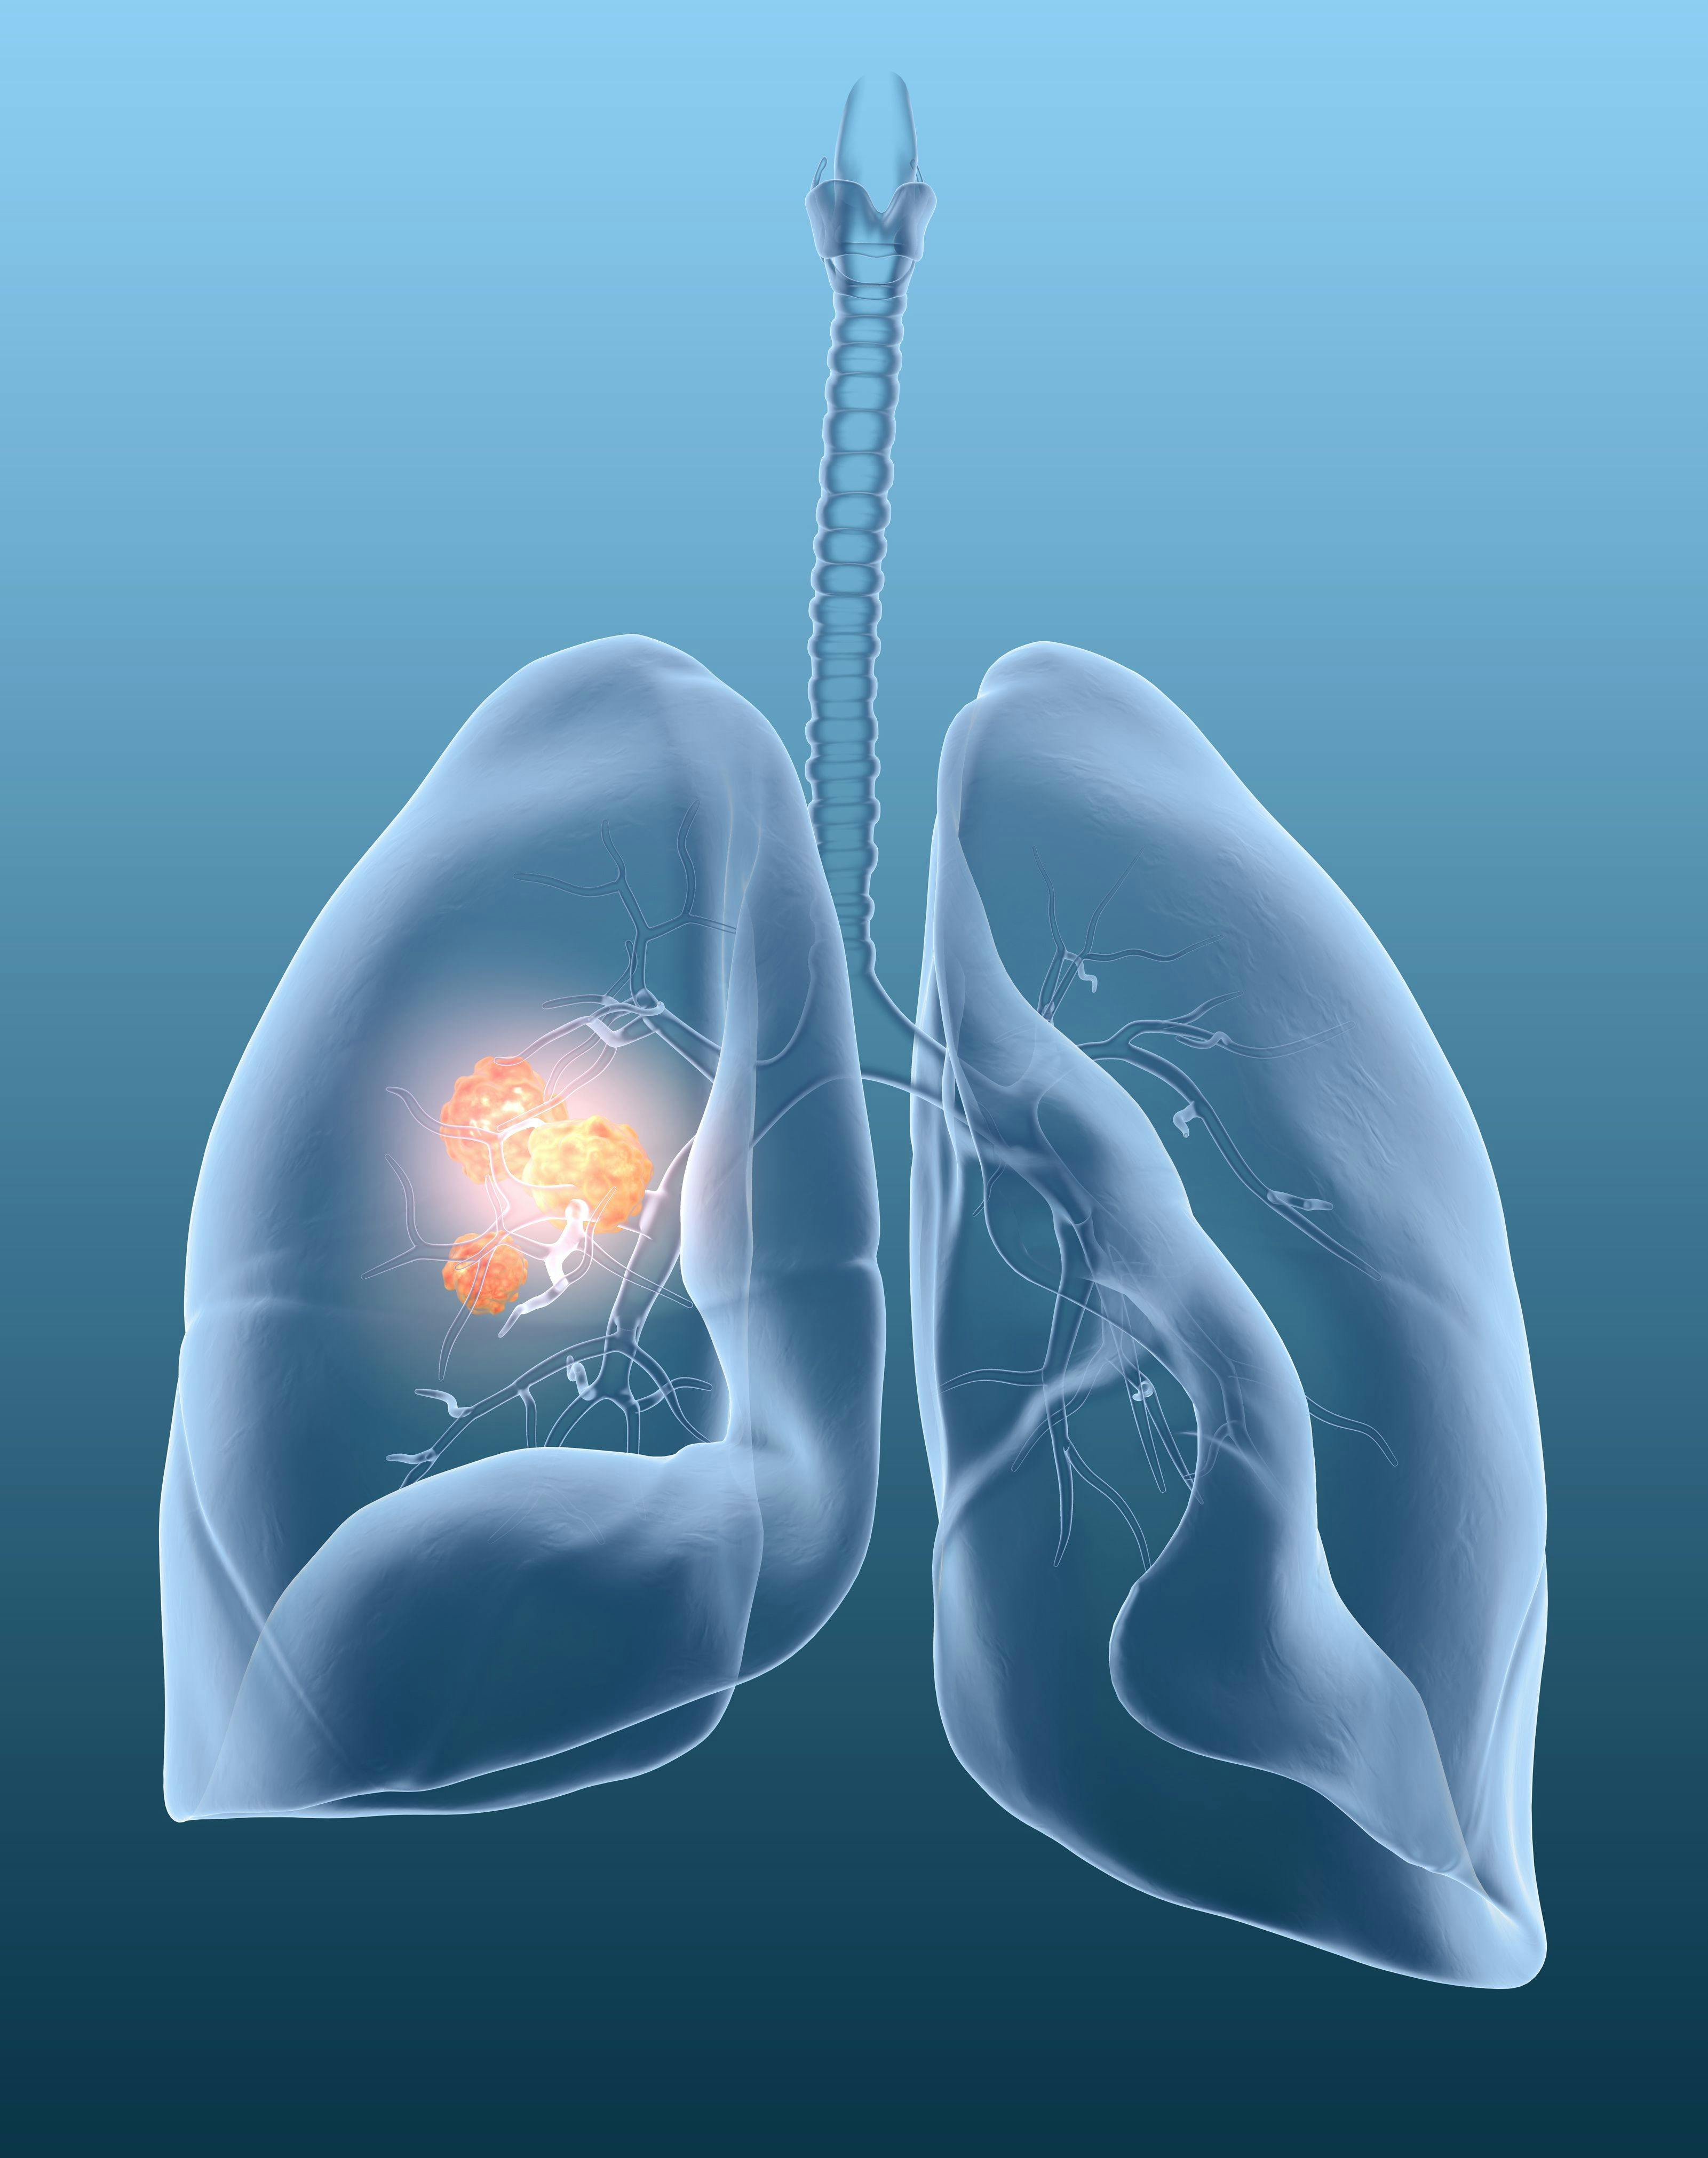 Better Responses Observed With Selpercatinib Versus Prior Systemic Therapies for RET+ NSCLC